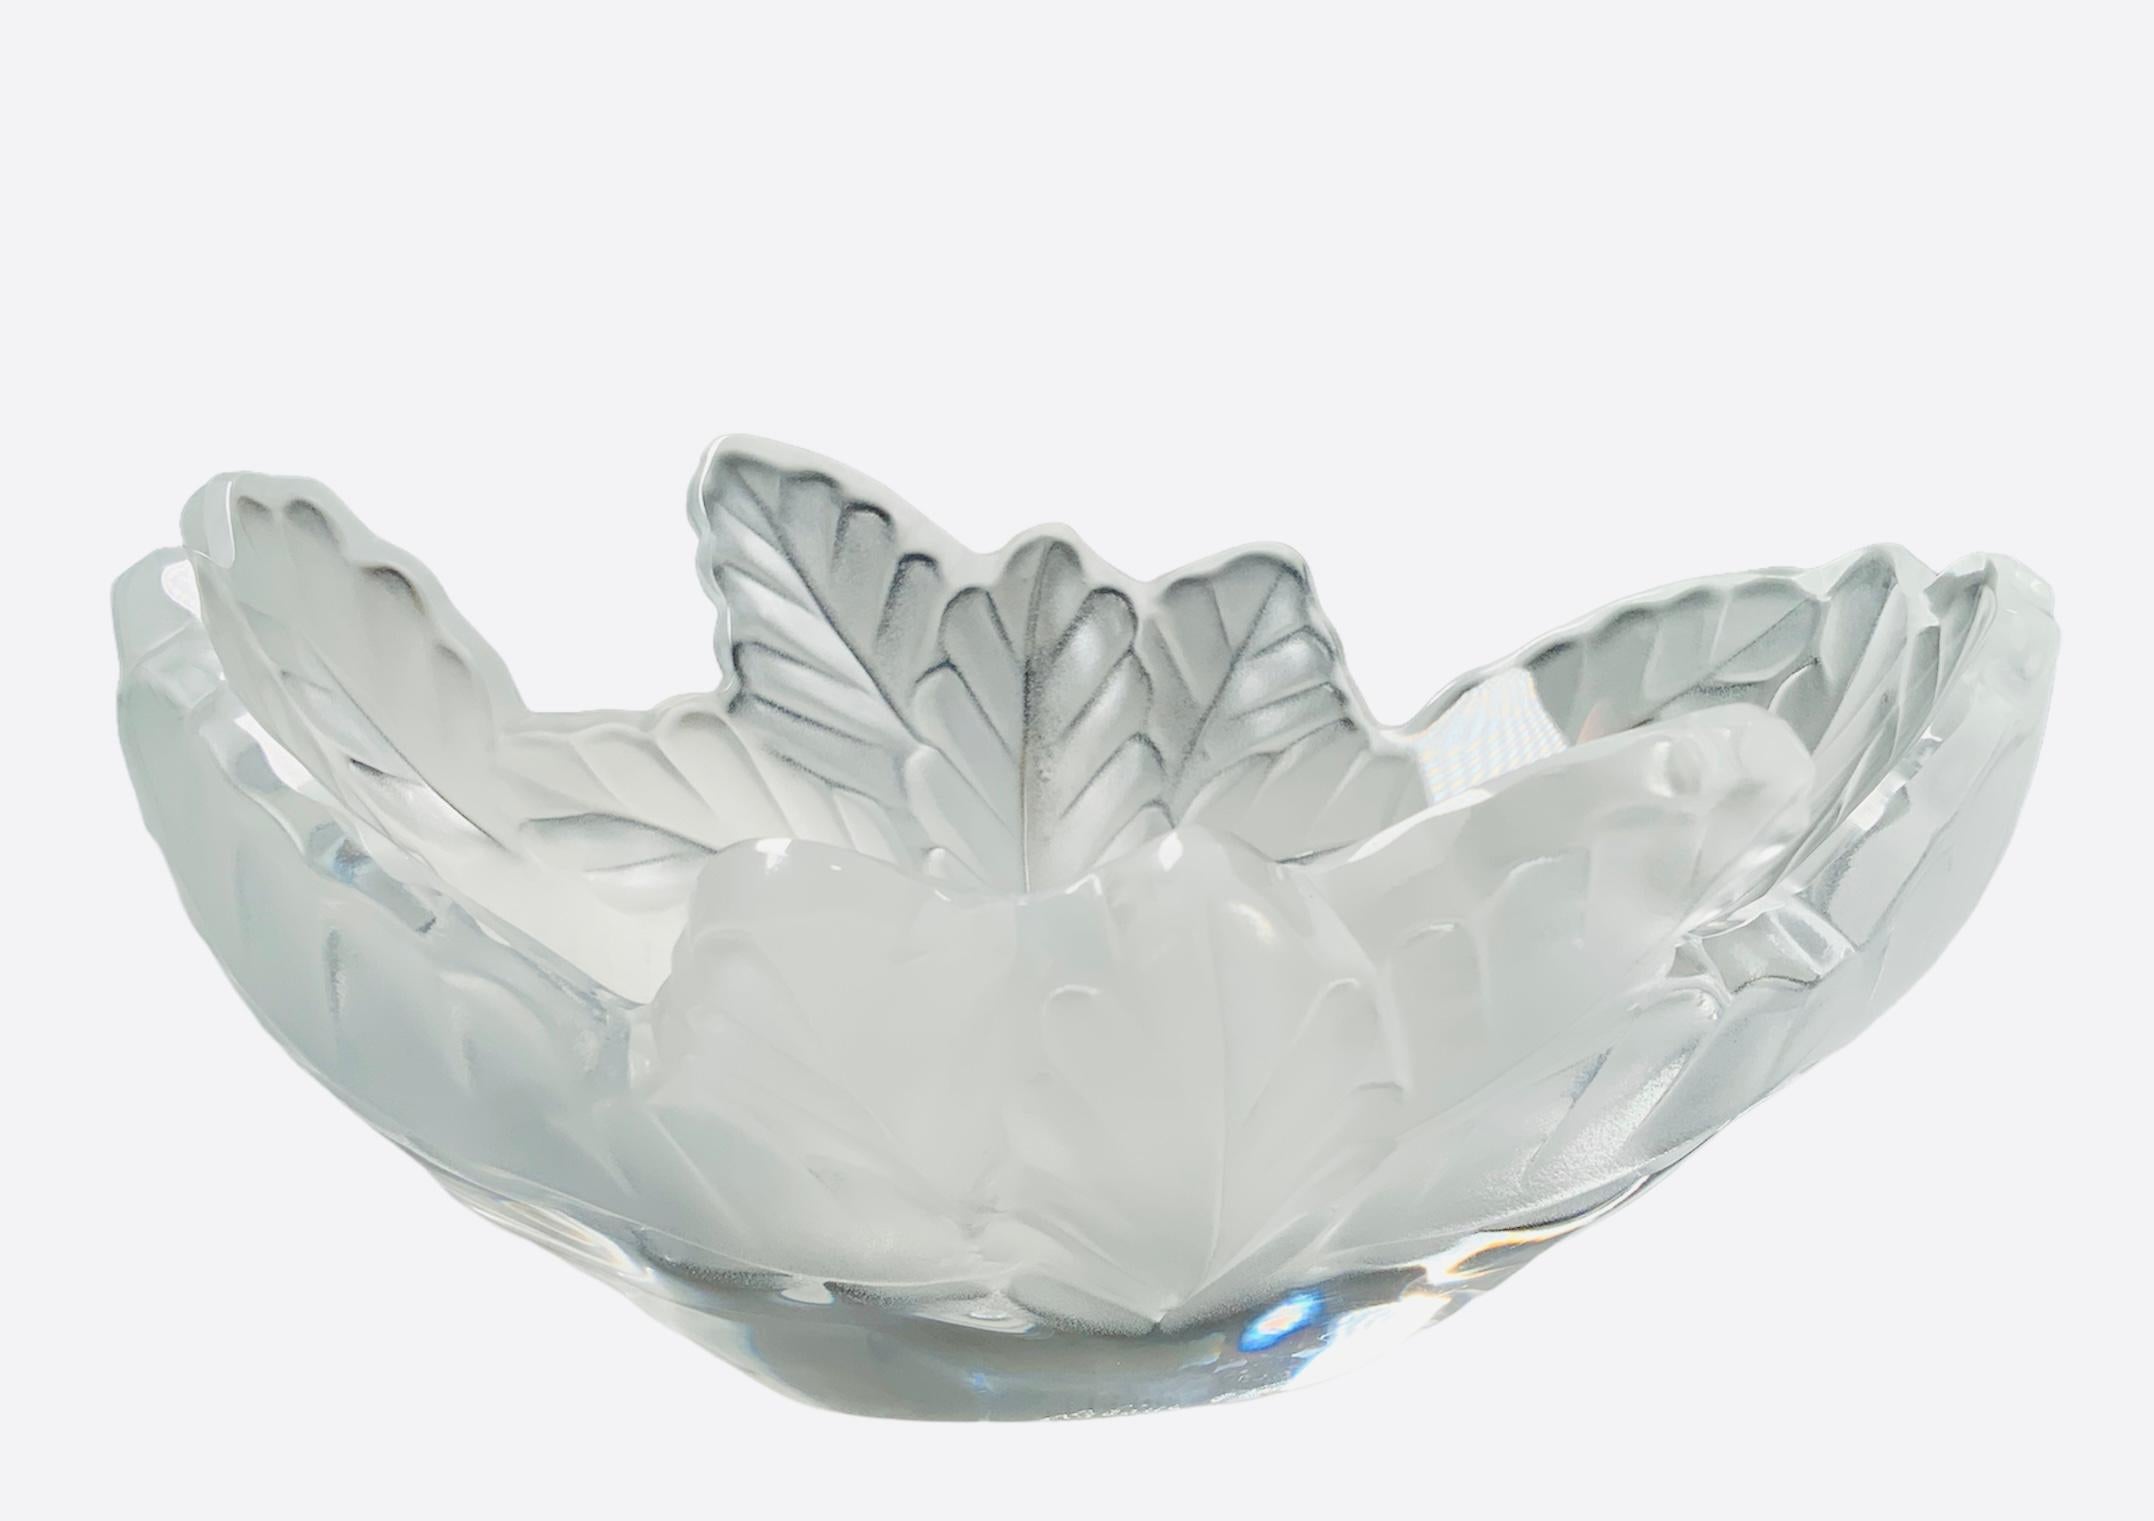 This is a Lalique Crystal Compiegne small size oval jardiniere bowl. The bowl crystal is clear and frosted. It depicts multiple oak leaves arranged around a circular center base. Below the base, it is the acid etched Lalique circle R, France